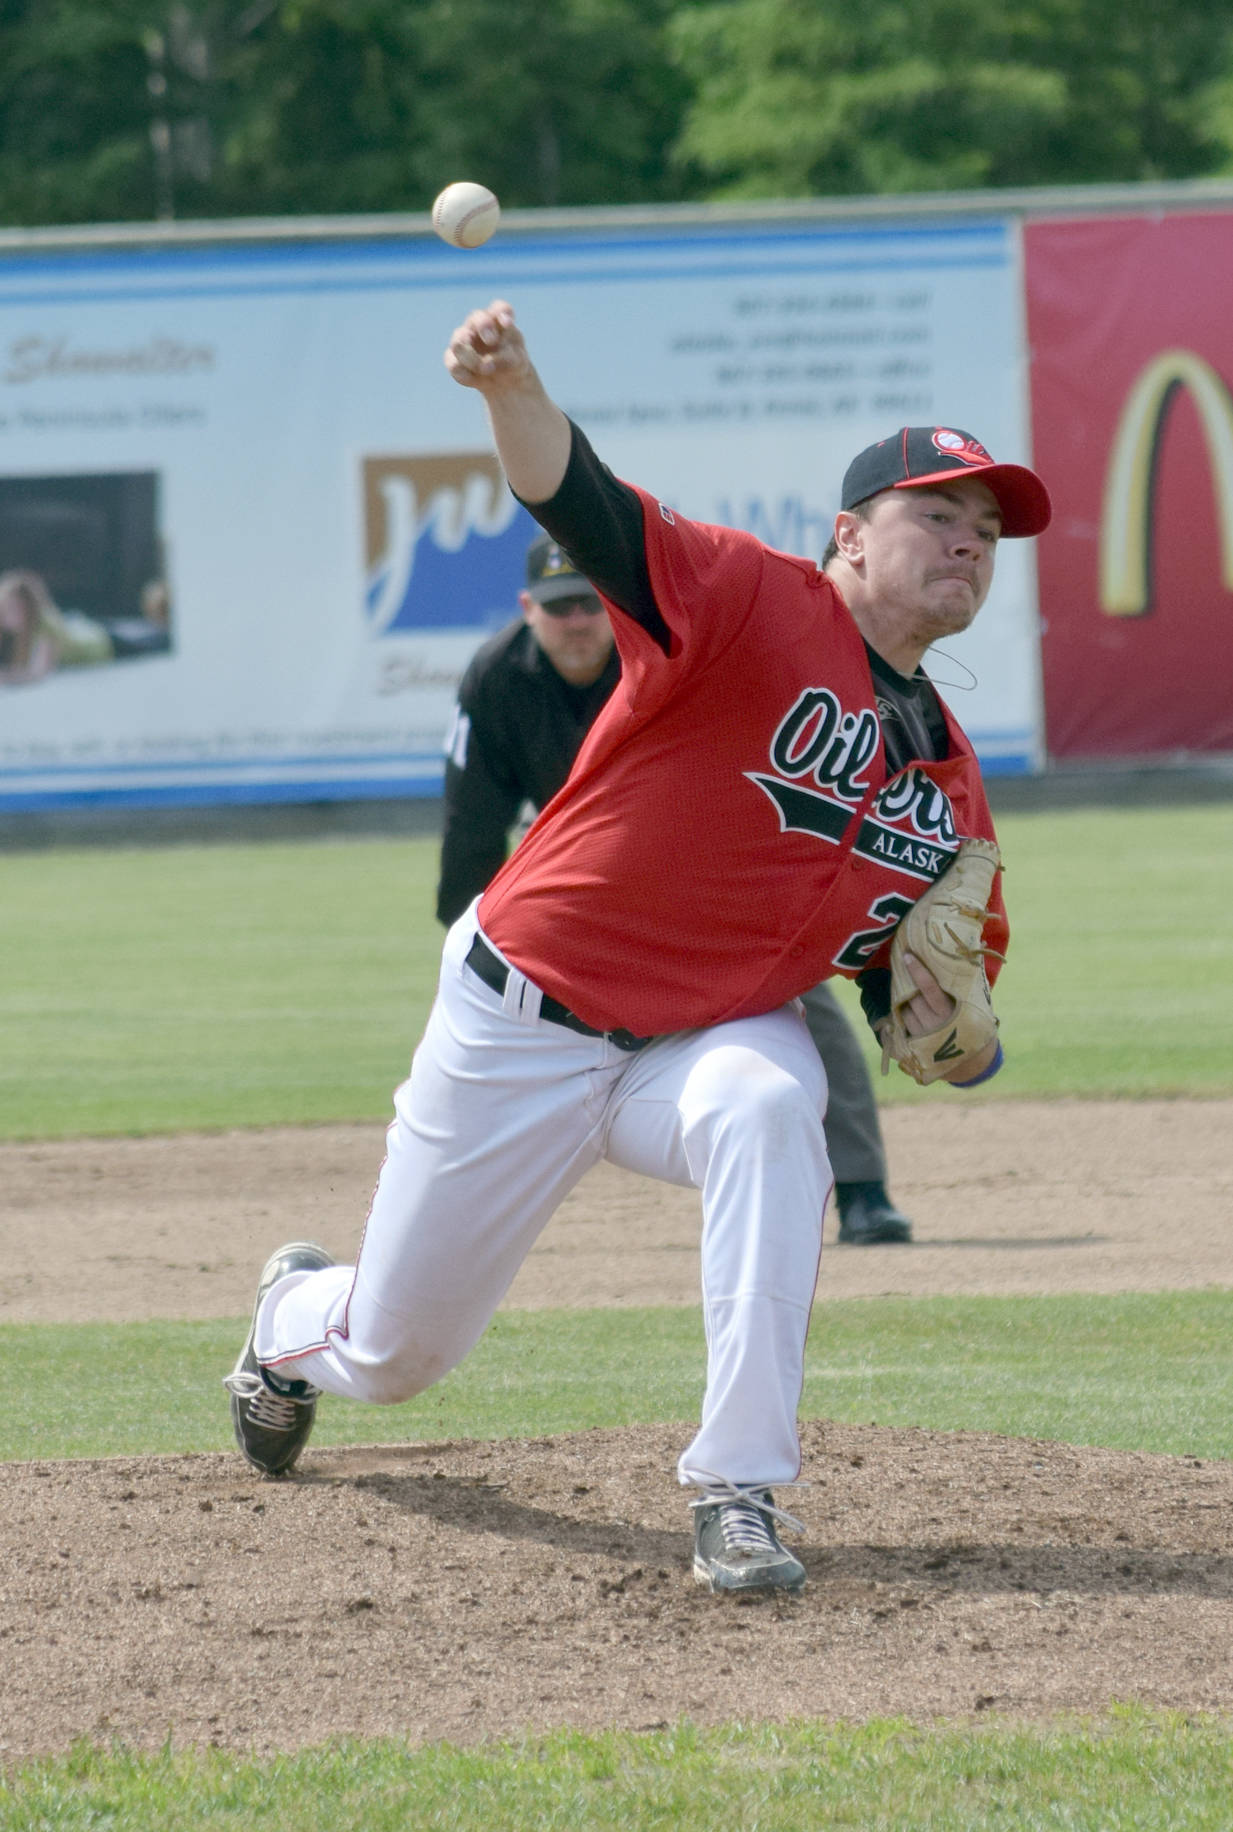 Oilers starting pitcher Devin Hayes delivers to the Anchorage Glacier Pilots on Sunday, June 25, 2017, at Coral Seymour Memorial Park in Kenai. (Photo by Jeff Helminiak/Peninsula Clarion)